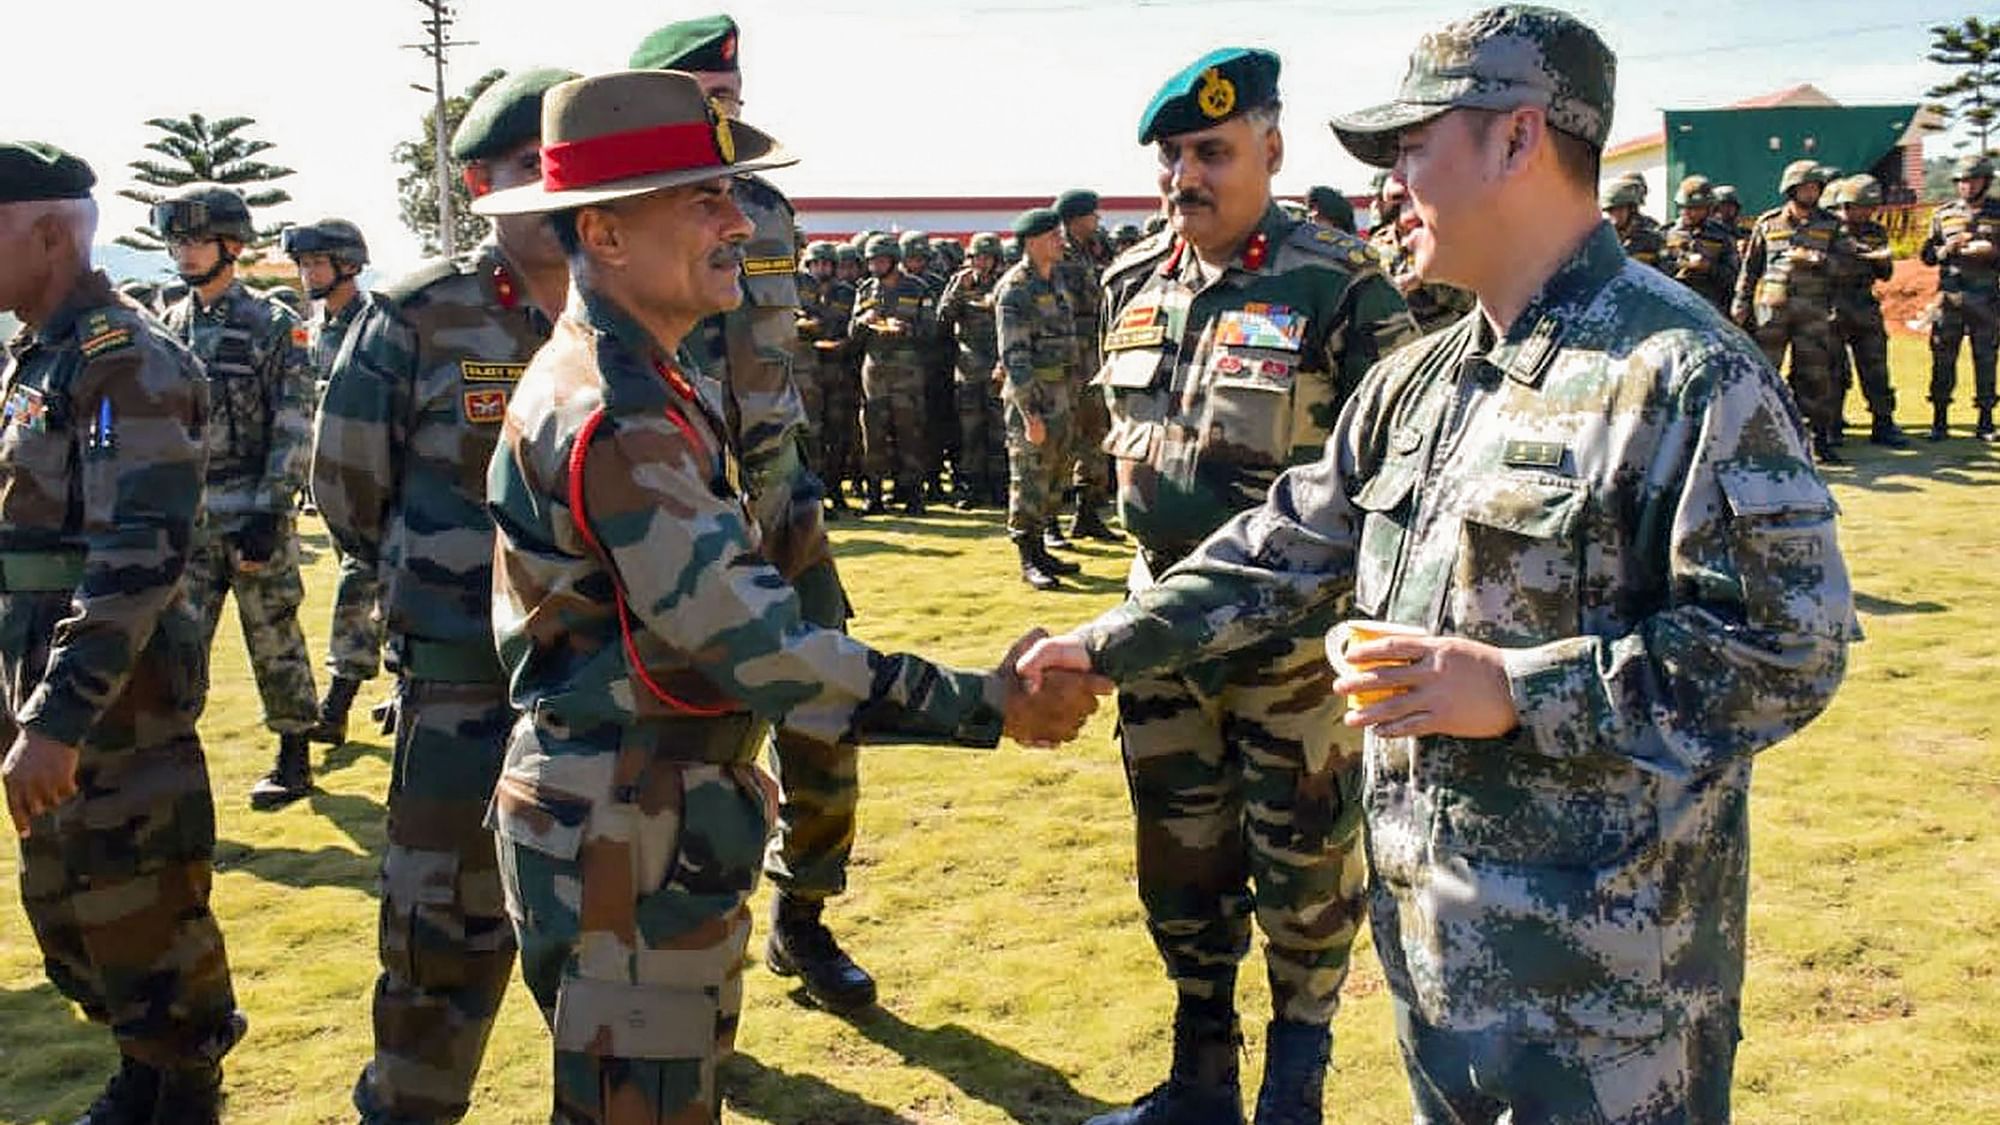 Indian Army and People’s Liberations Army (PLA) officials shake hands on the opening day of the India- China joint exercise - Hand-in-Hand 2019, at the Joint Training Node (JTN), Umroi in Meghalaya.